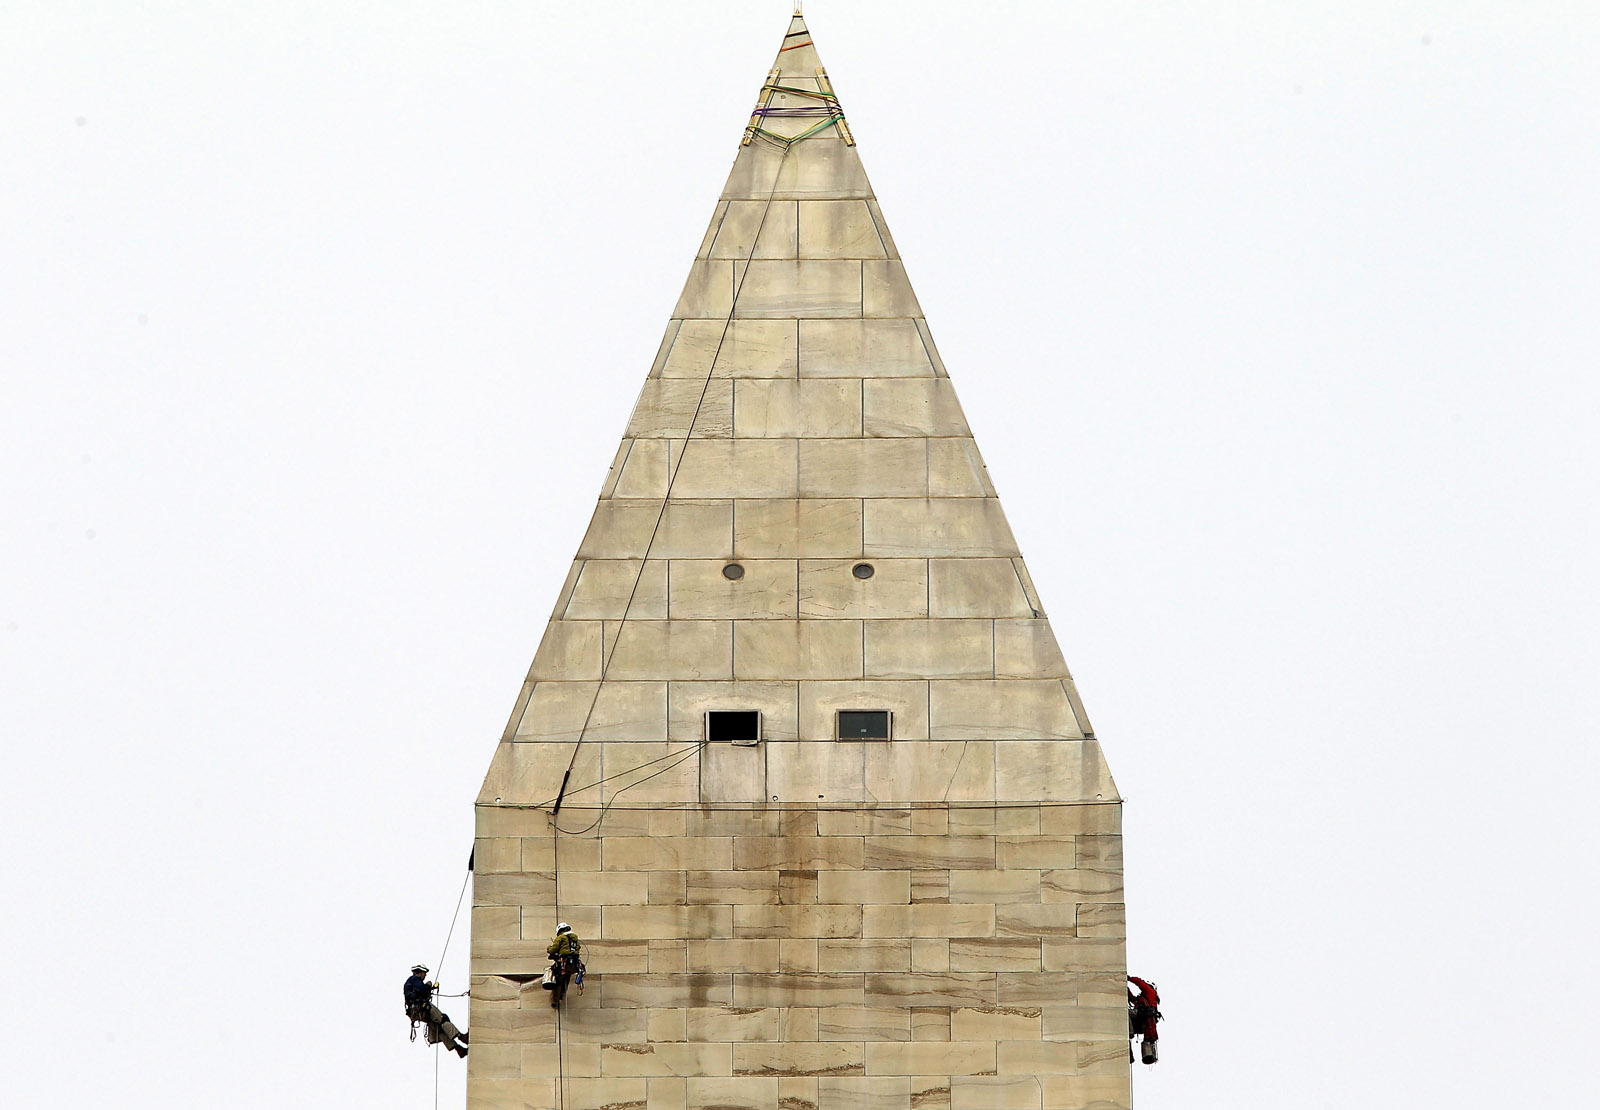 WASHINGTON, DC - OCTOBER 03:  Difficult Access Team (DAT) engineers with Wiss, Janney, Elstner Associates examine stones of the Washington Monument for cracks October 3, 2011 in Washington, DC. The DAT team continued the inspection of the monument to check for more damage caused by the 5.8-magnitude earthquake on August 23, 2011.  (Photo by Alex Wong/Getty Images)